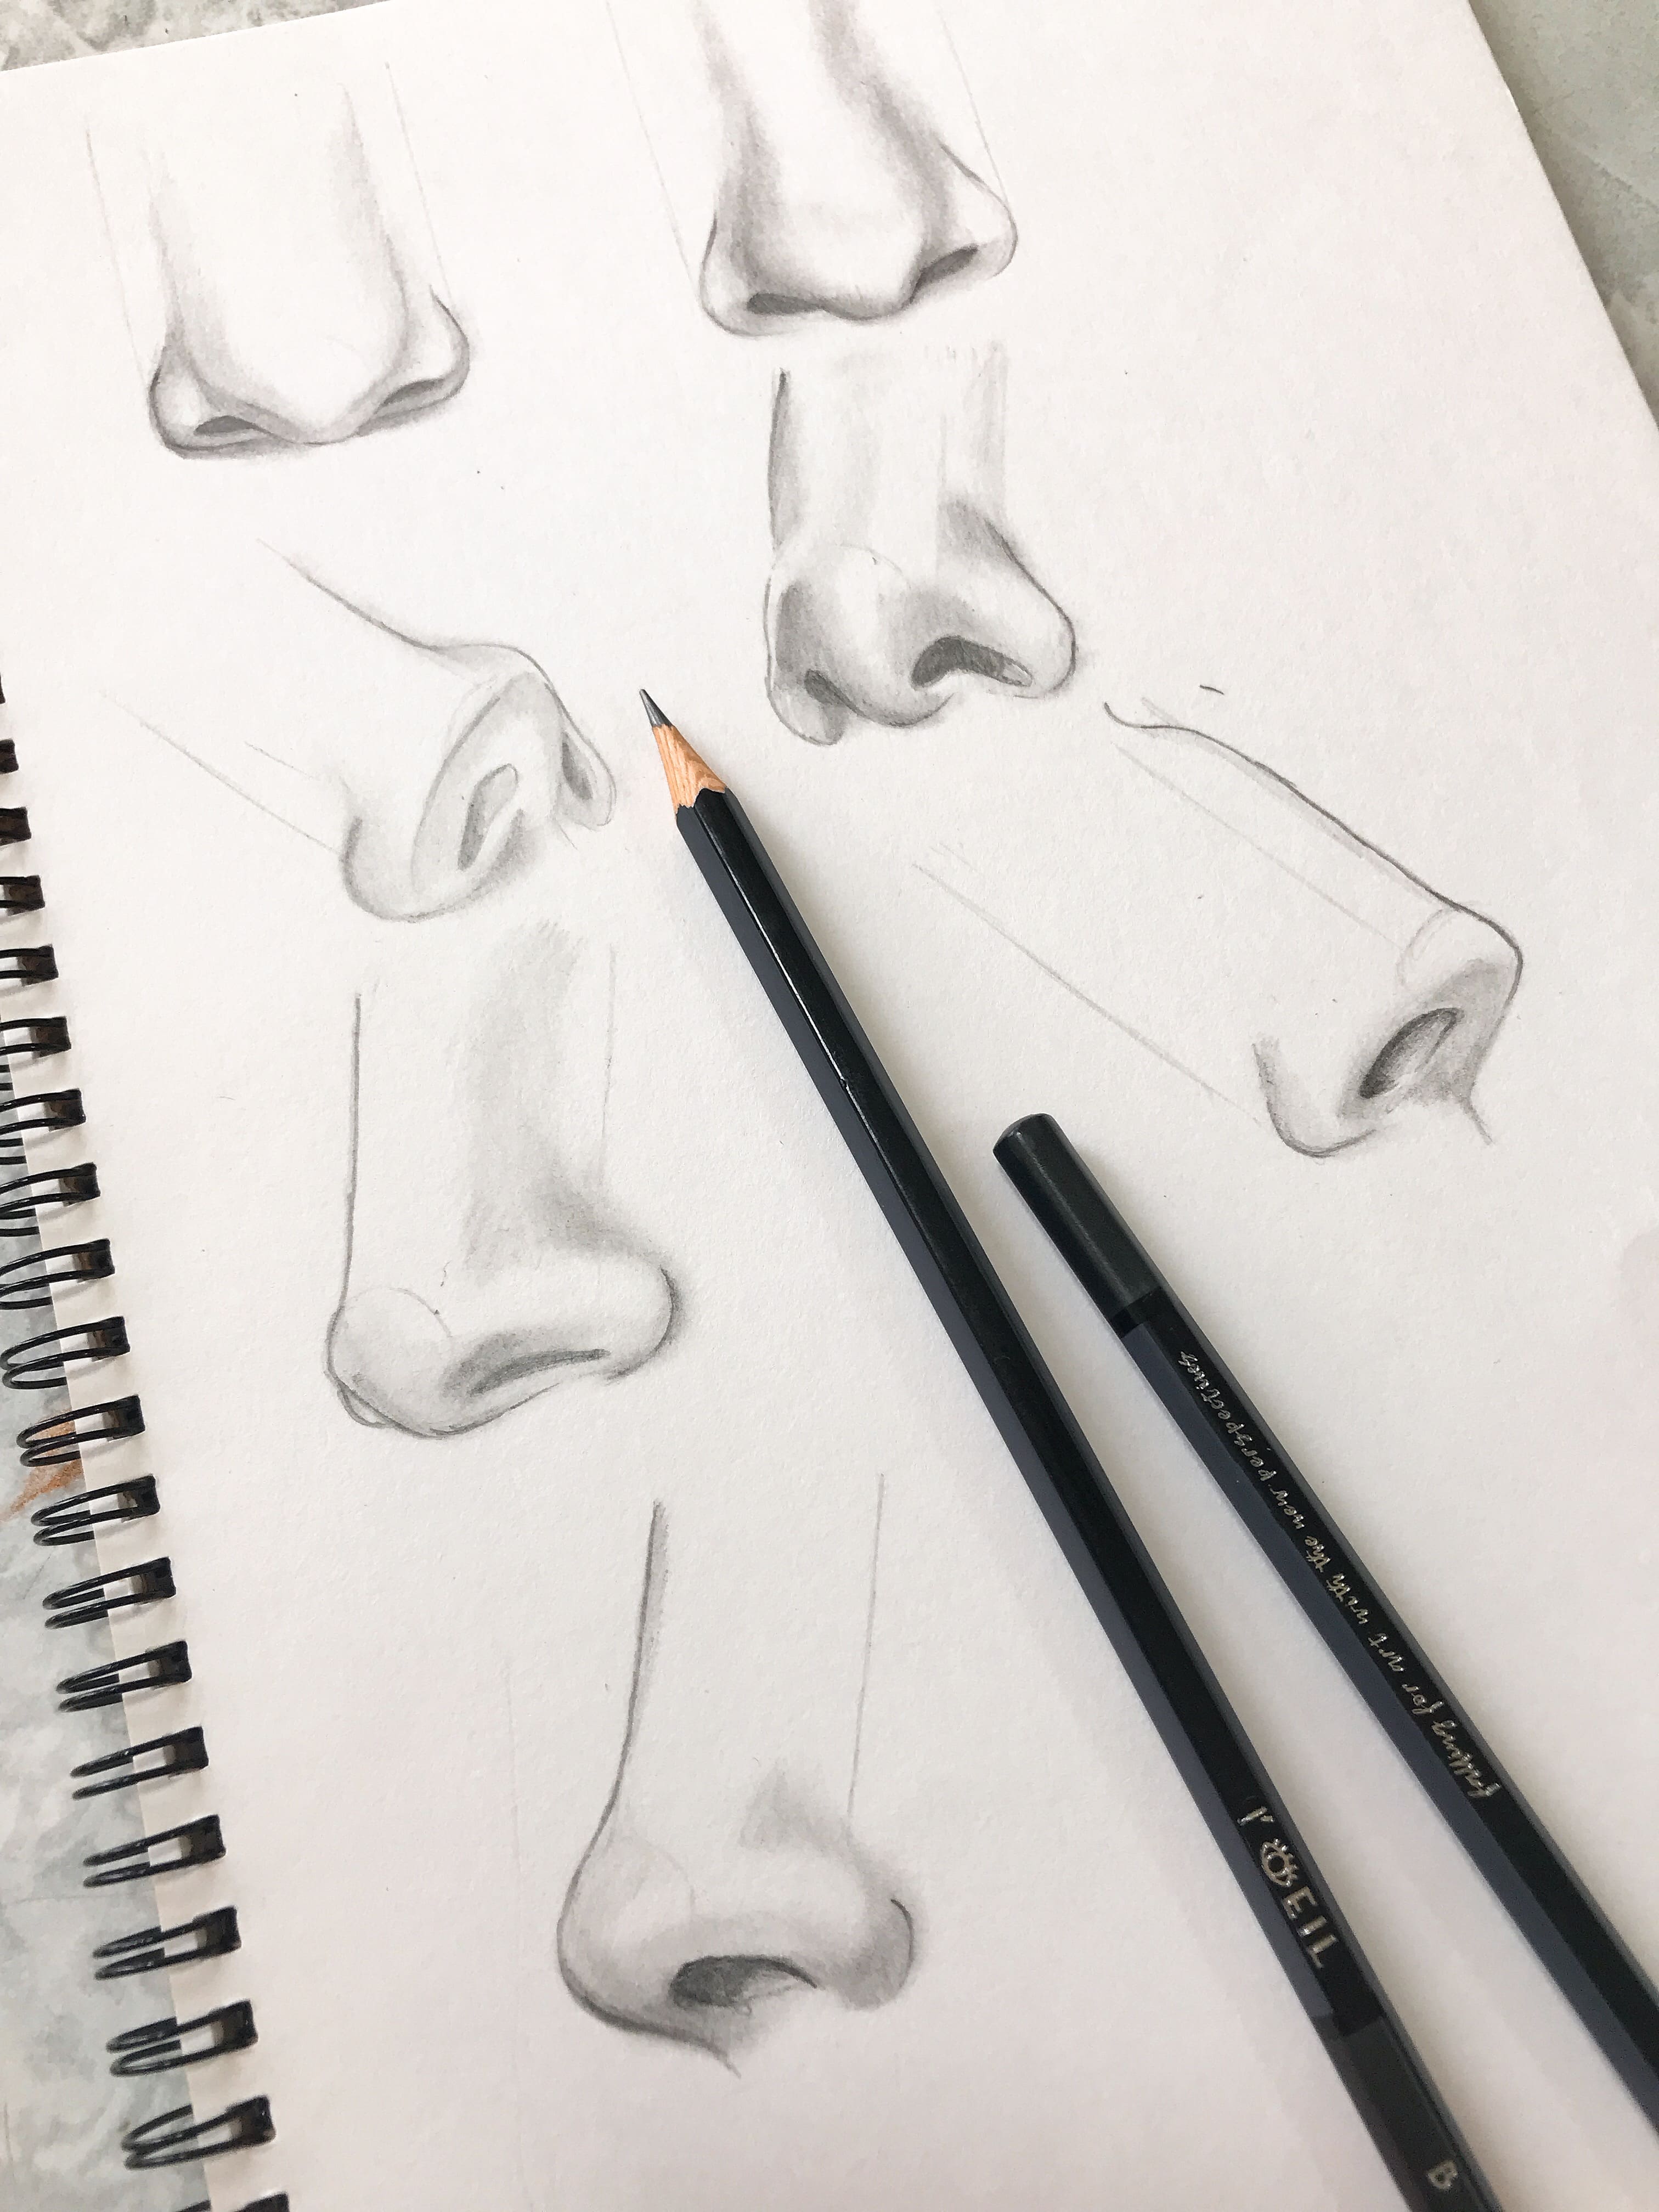 How to Draw a Nose? | L'oeil – Loeil Art Supplies | for creative you